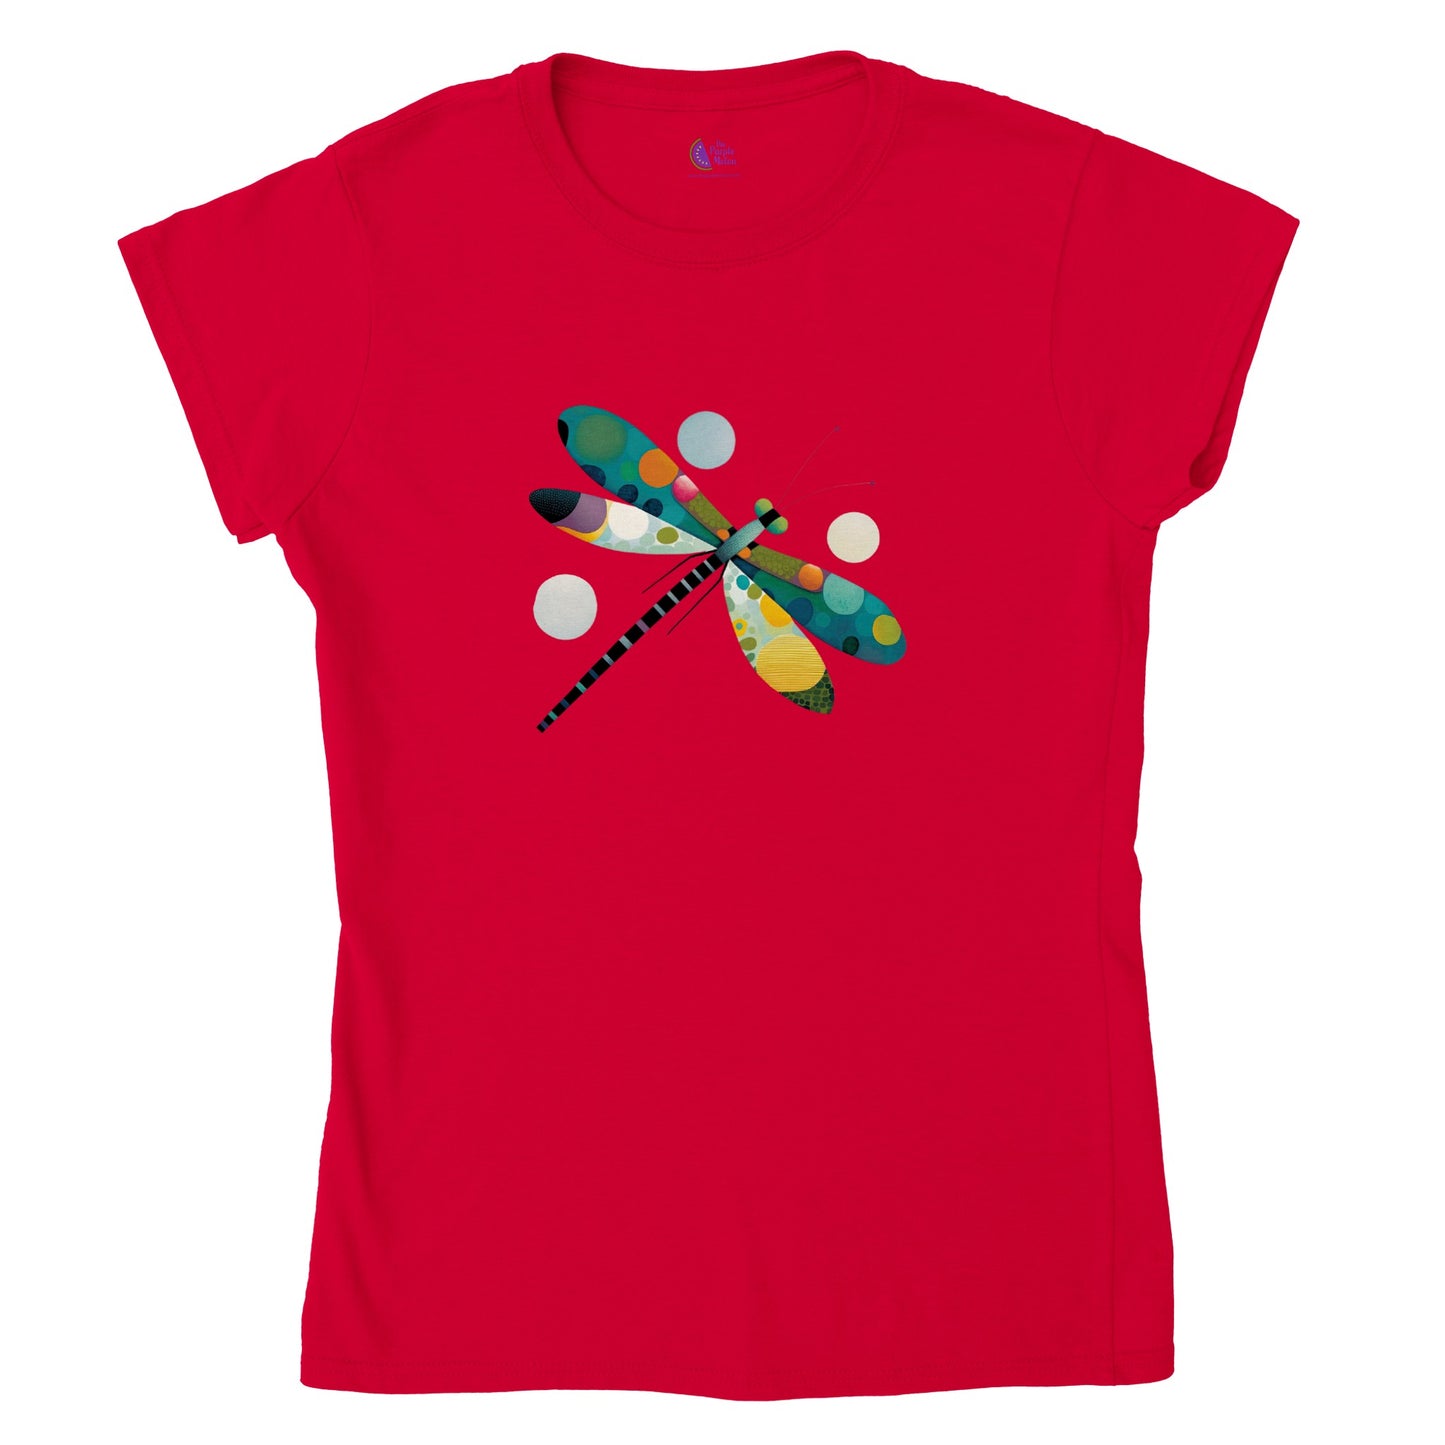 Red t-shirt with an abstract colourful dragonfly print